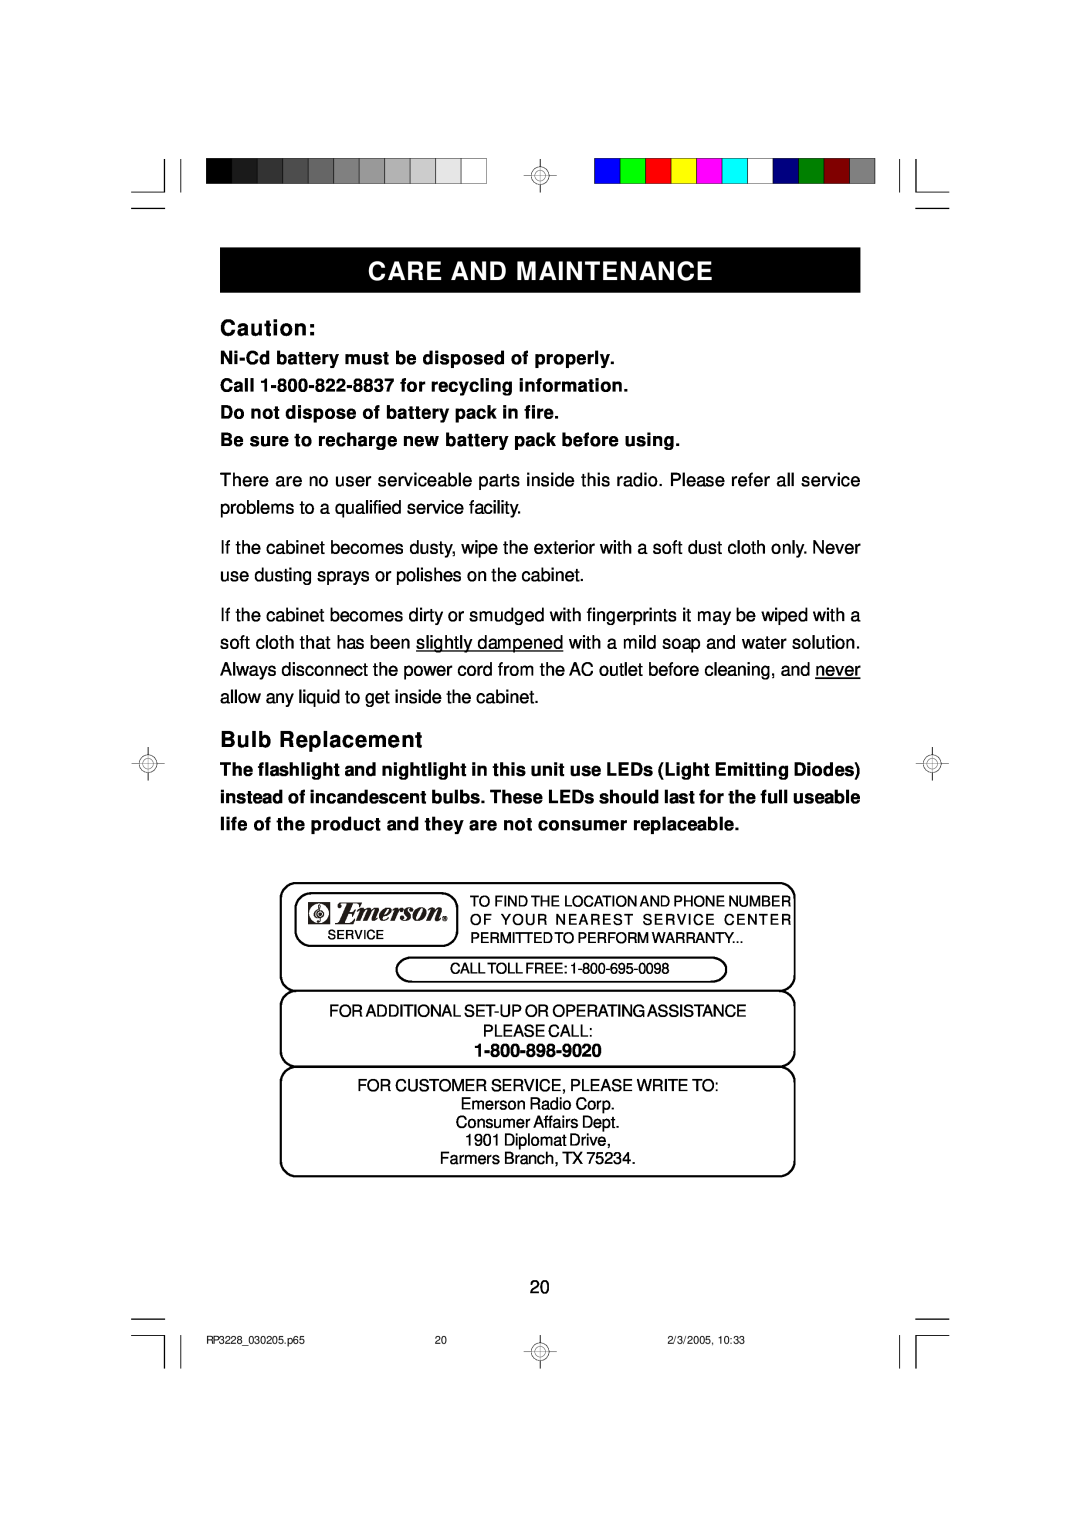 Emerson RP3228SL owner manual Care And Maintenance, Bulb Replacement 